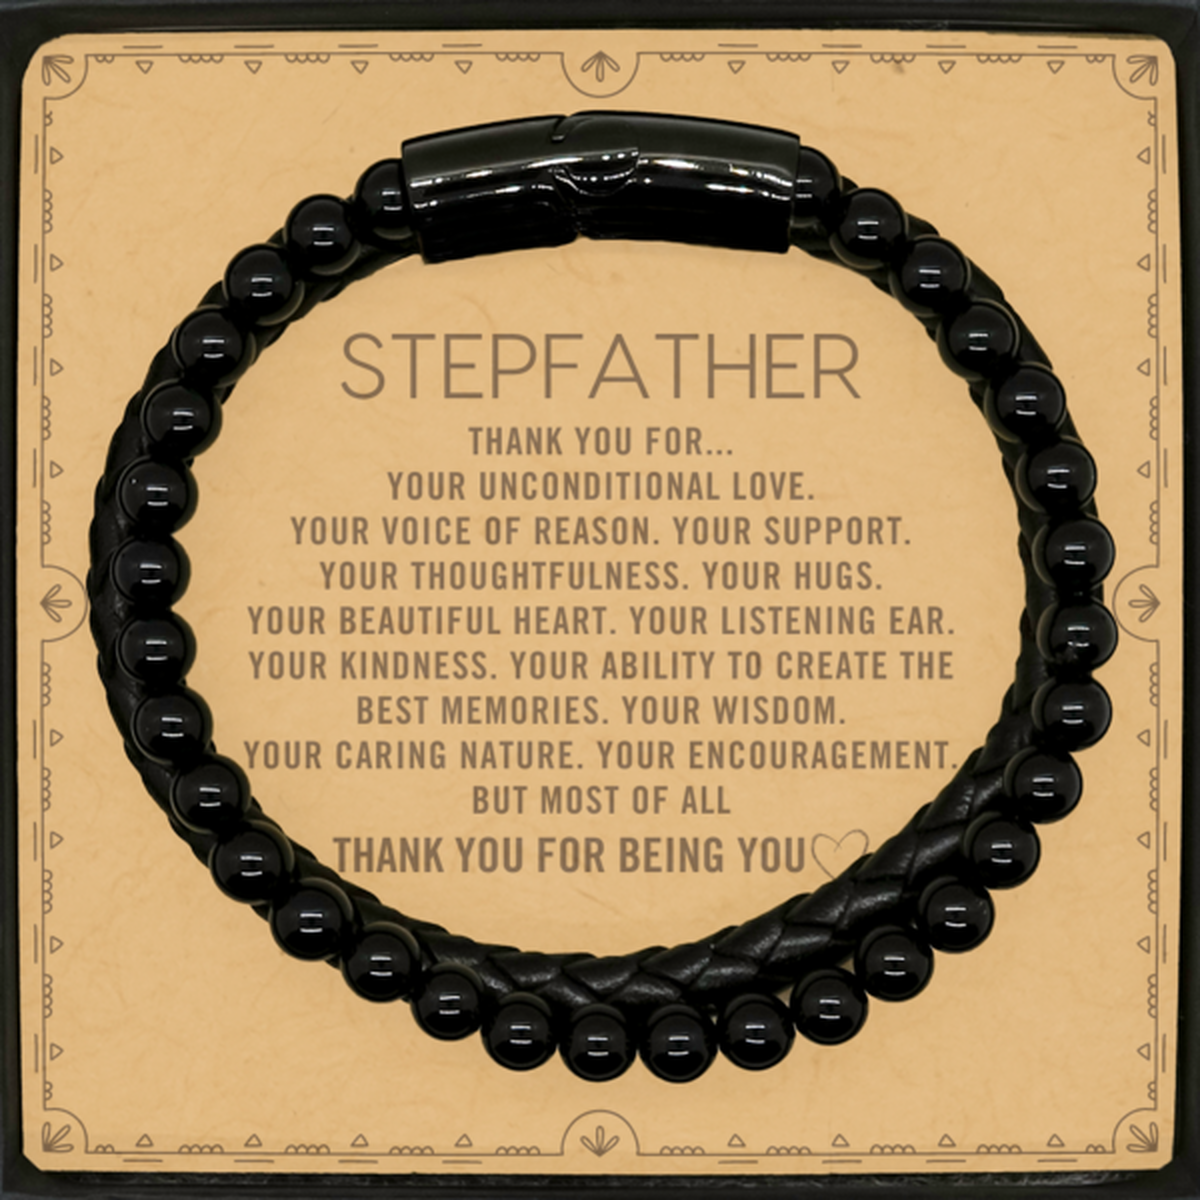 Stepfather Stone Leather Bracelets Custom, Message Card Gifts For Stepfather Christmas Graduation Birthday Gifts for Men Women Stepfather Thank you for Your unconditional love